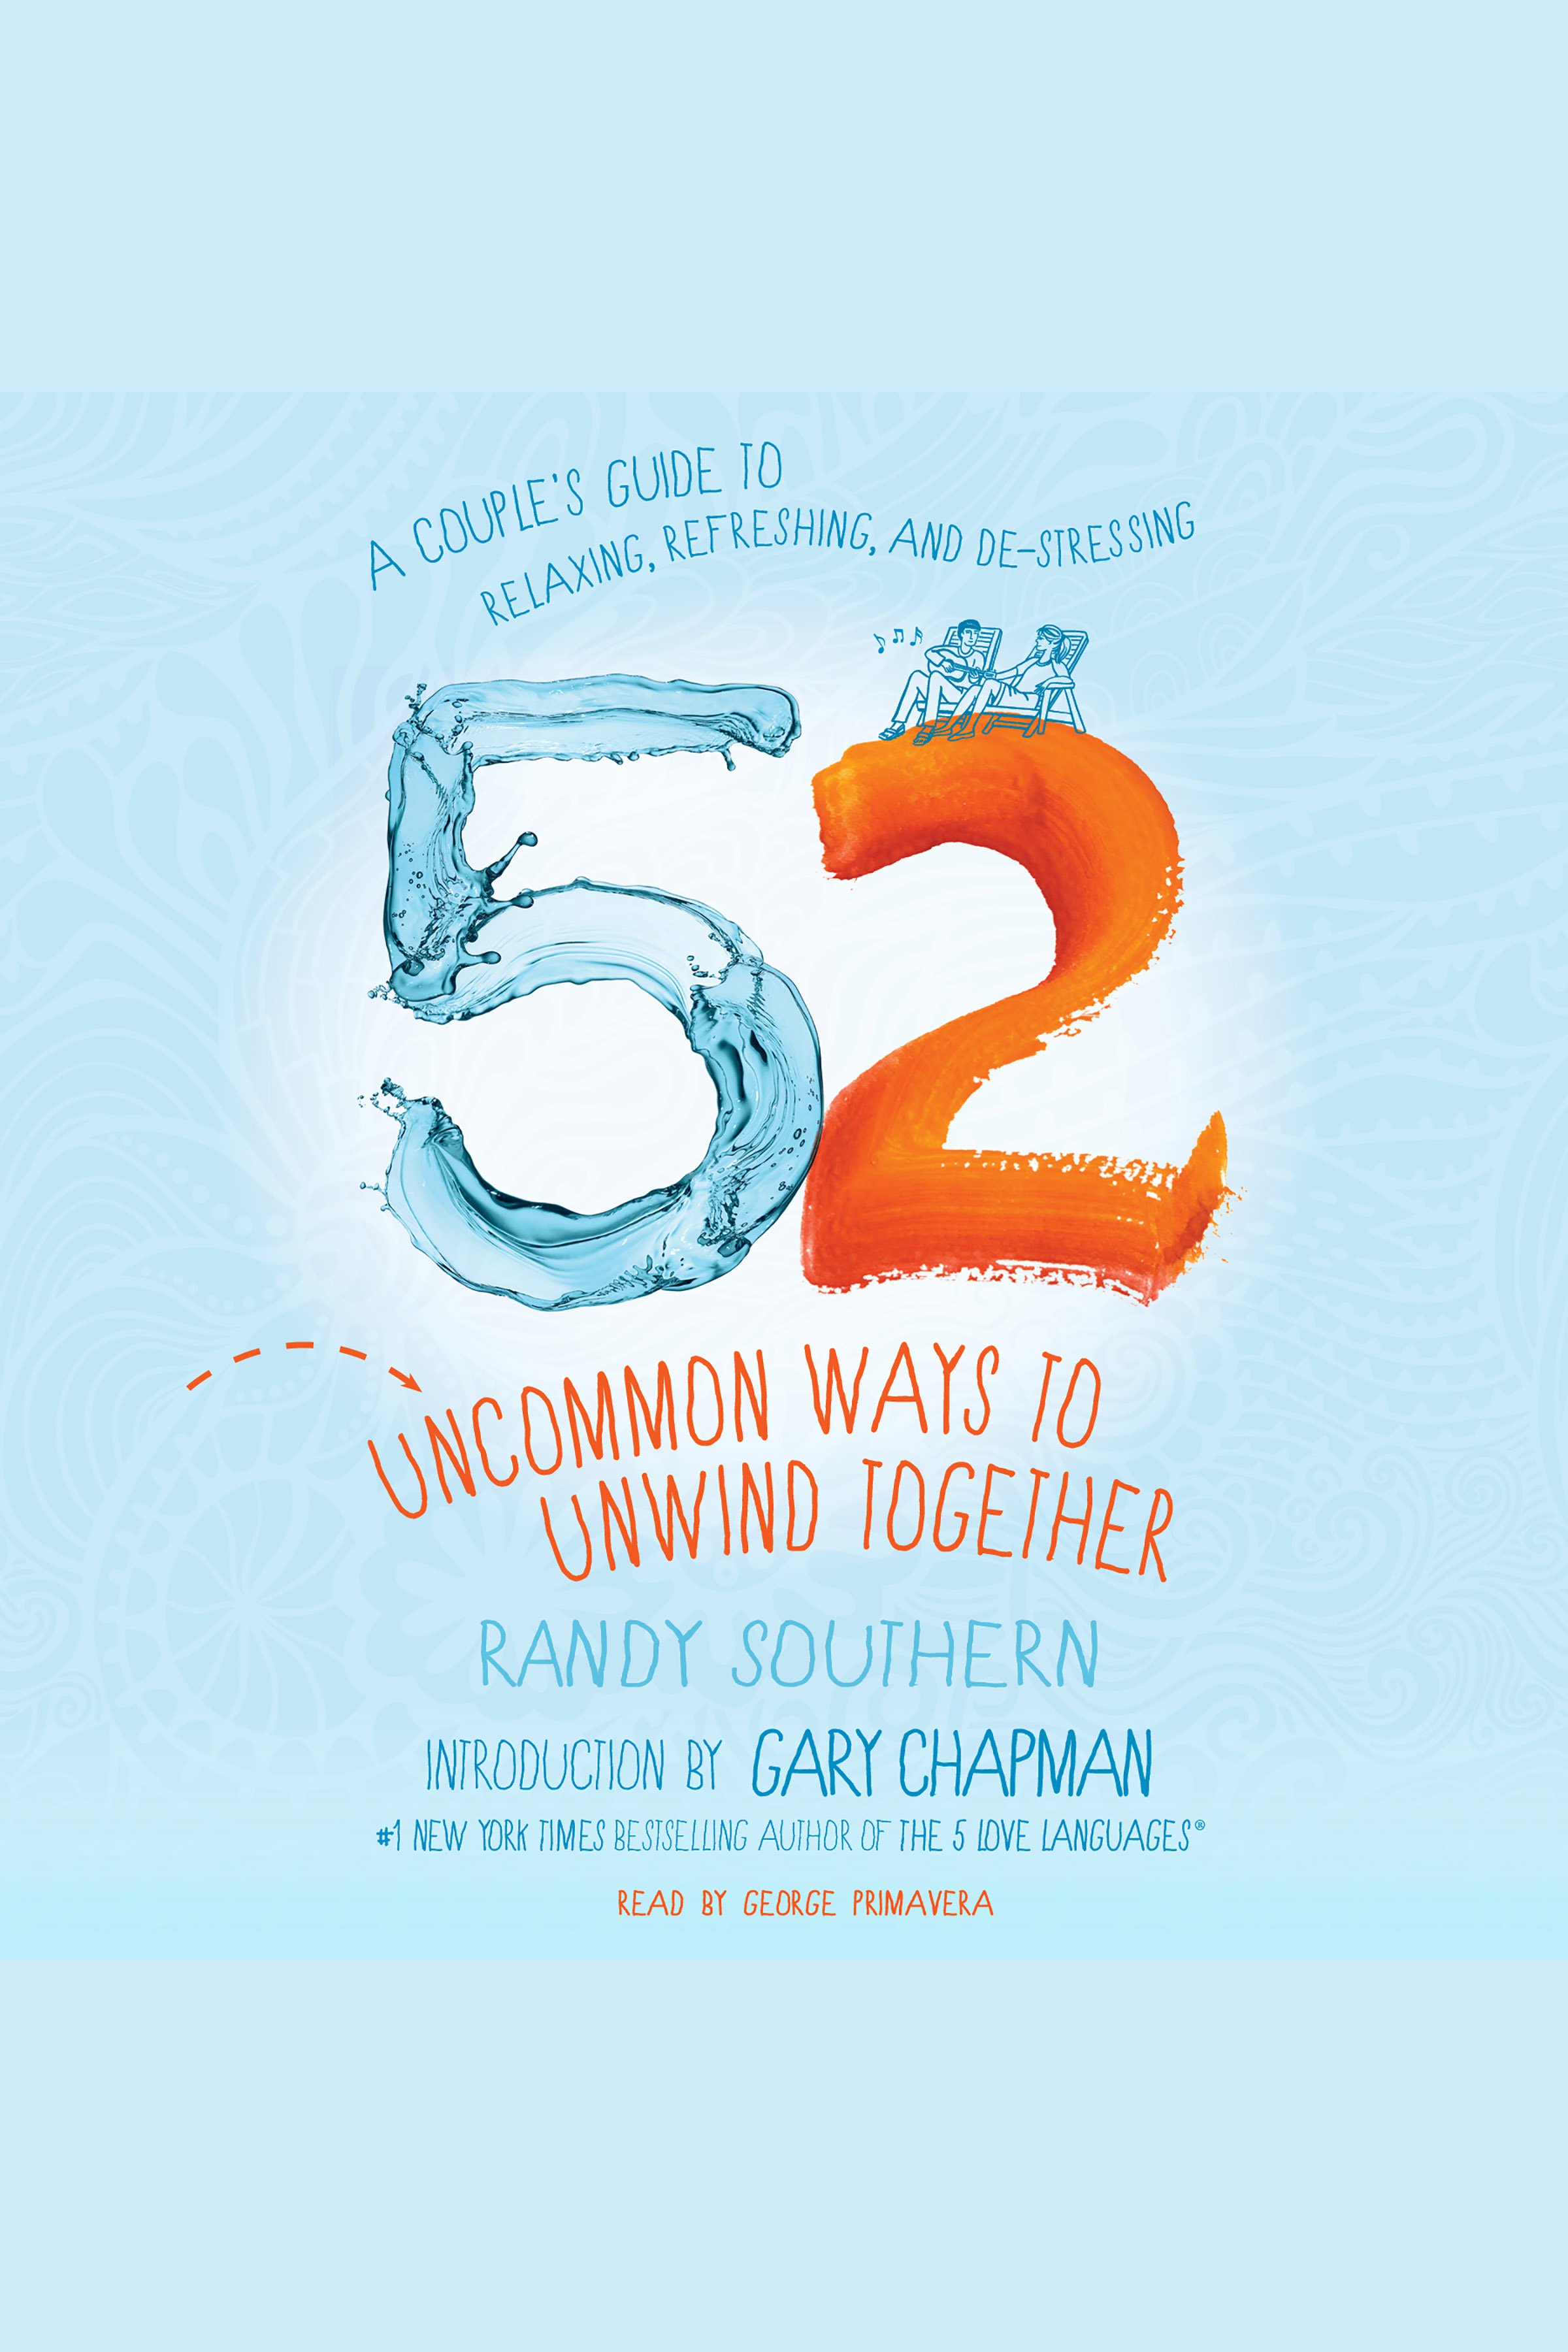 52 Uncommon Ways to Unwind Together A Couple's Guide to Relaxing, Refreshing, and De-Stressing